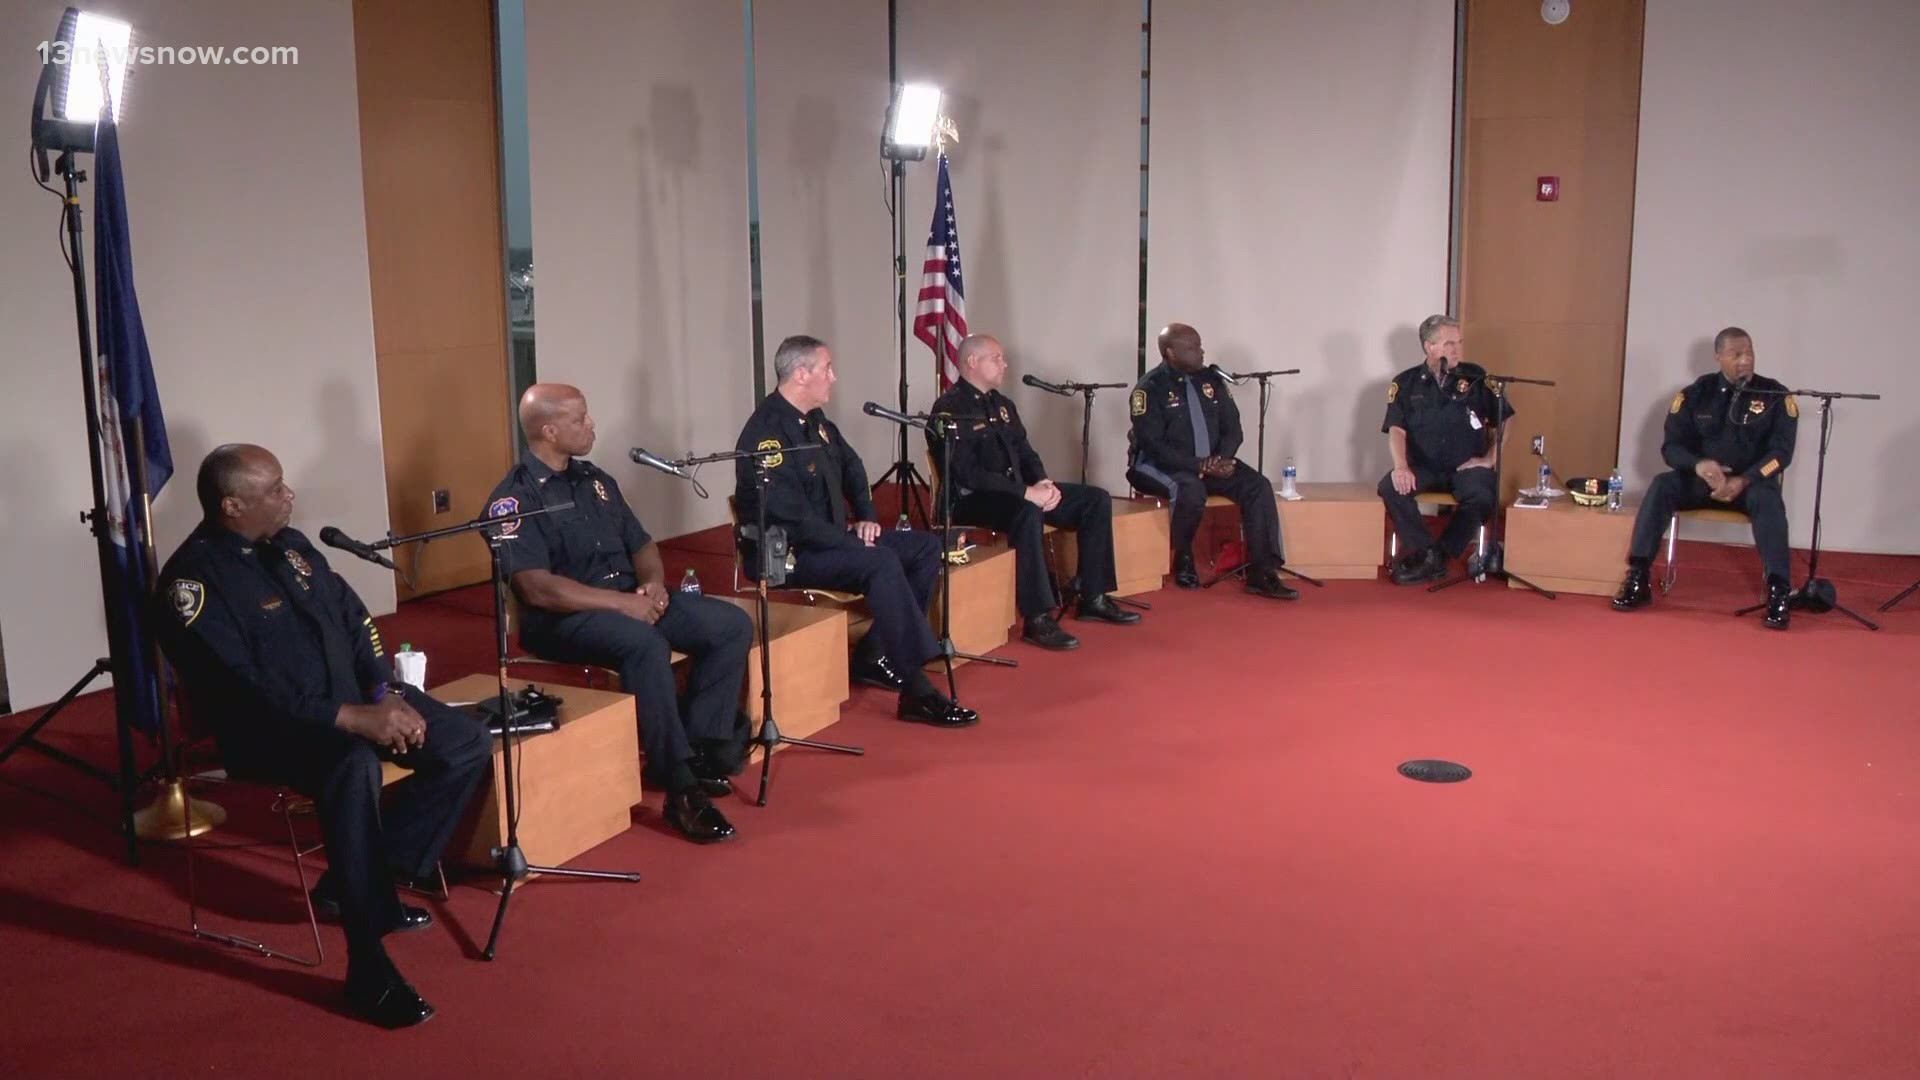 Seven police chiefs discussed the topics of gun violence, how guns get in the hands of young kids and other issues.